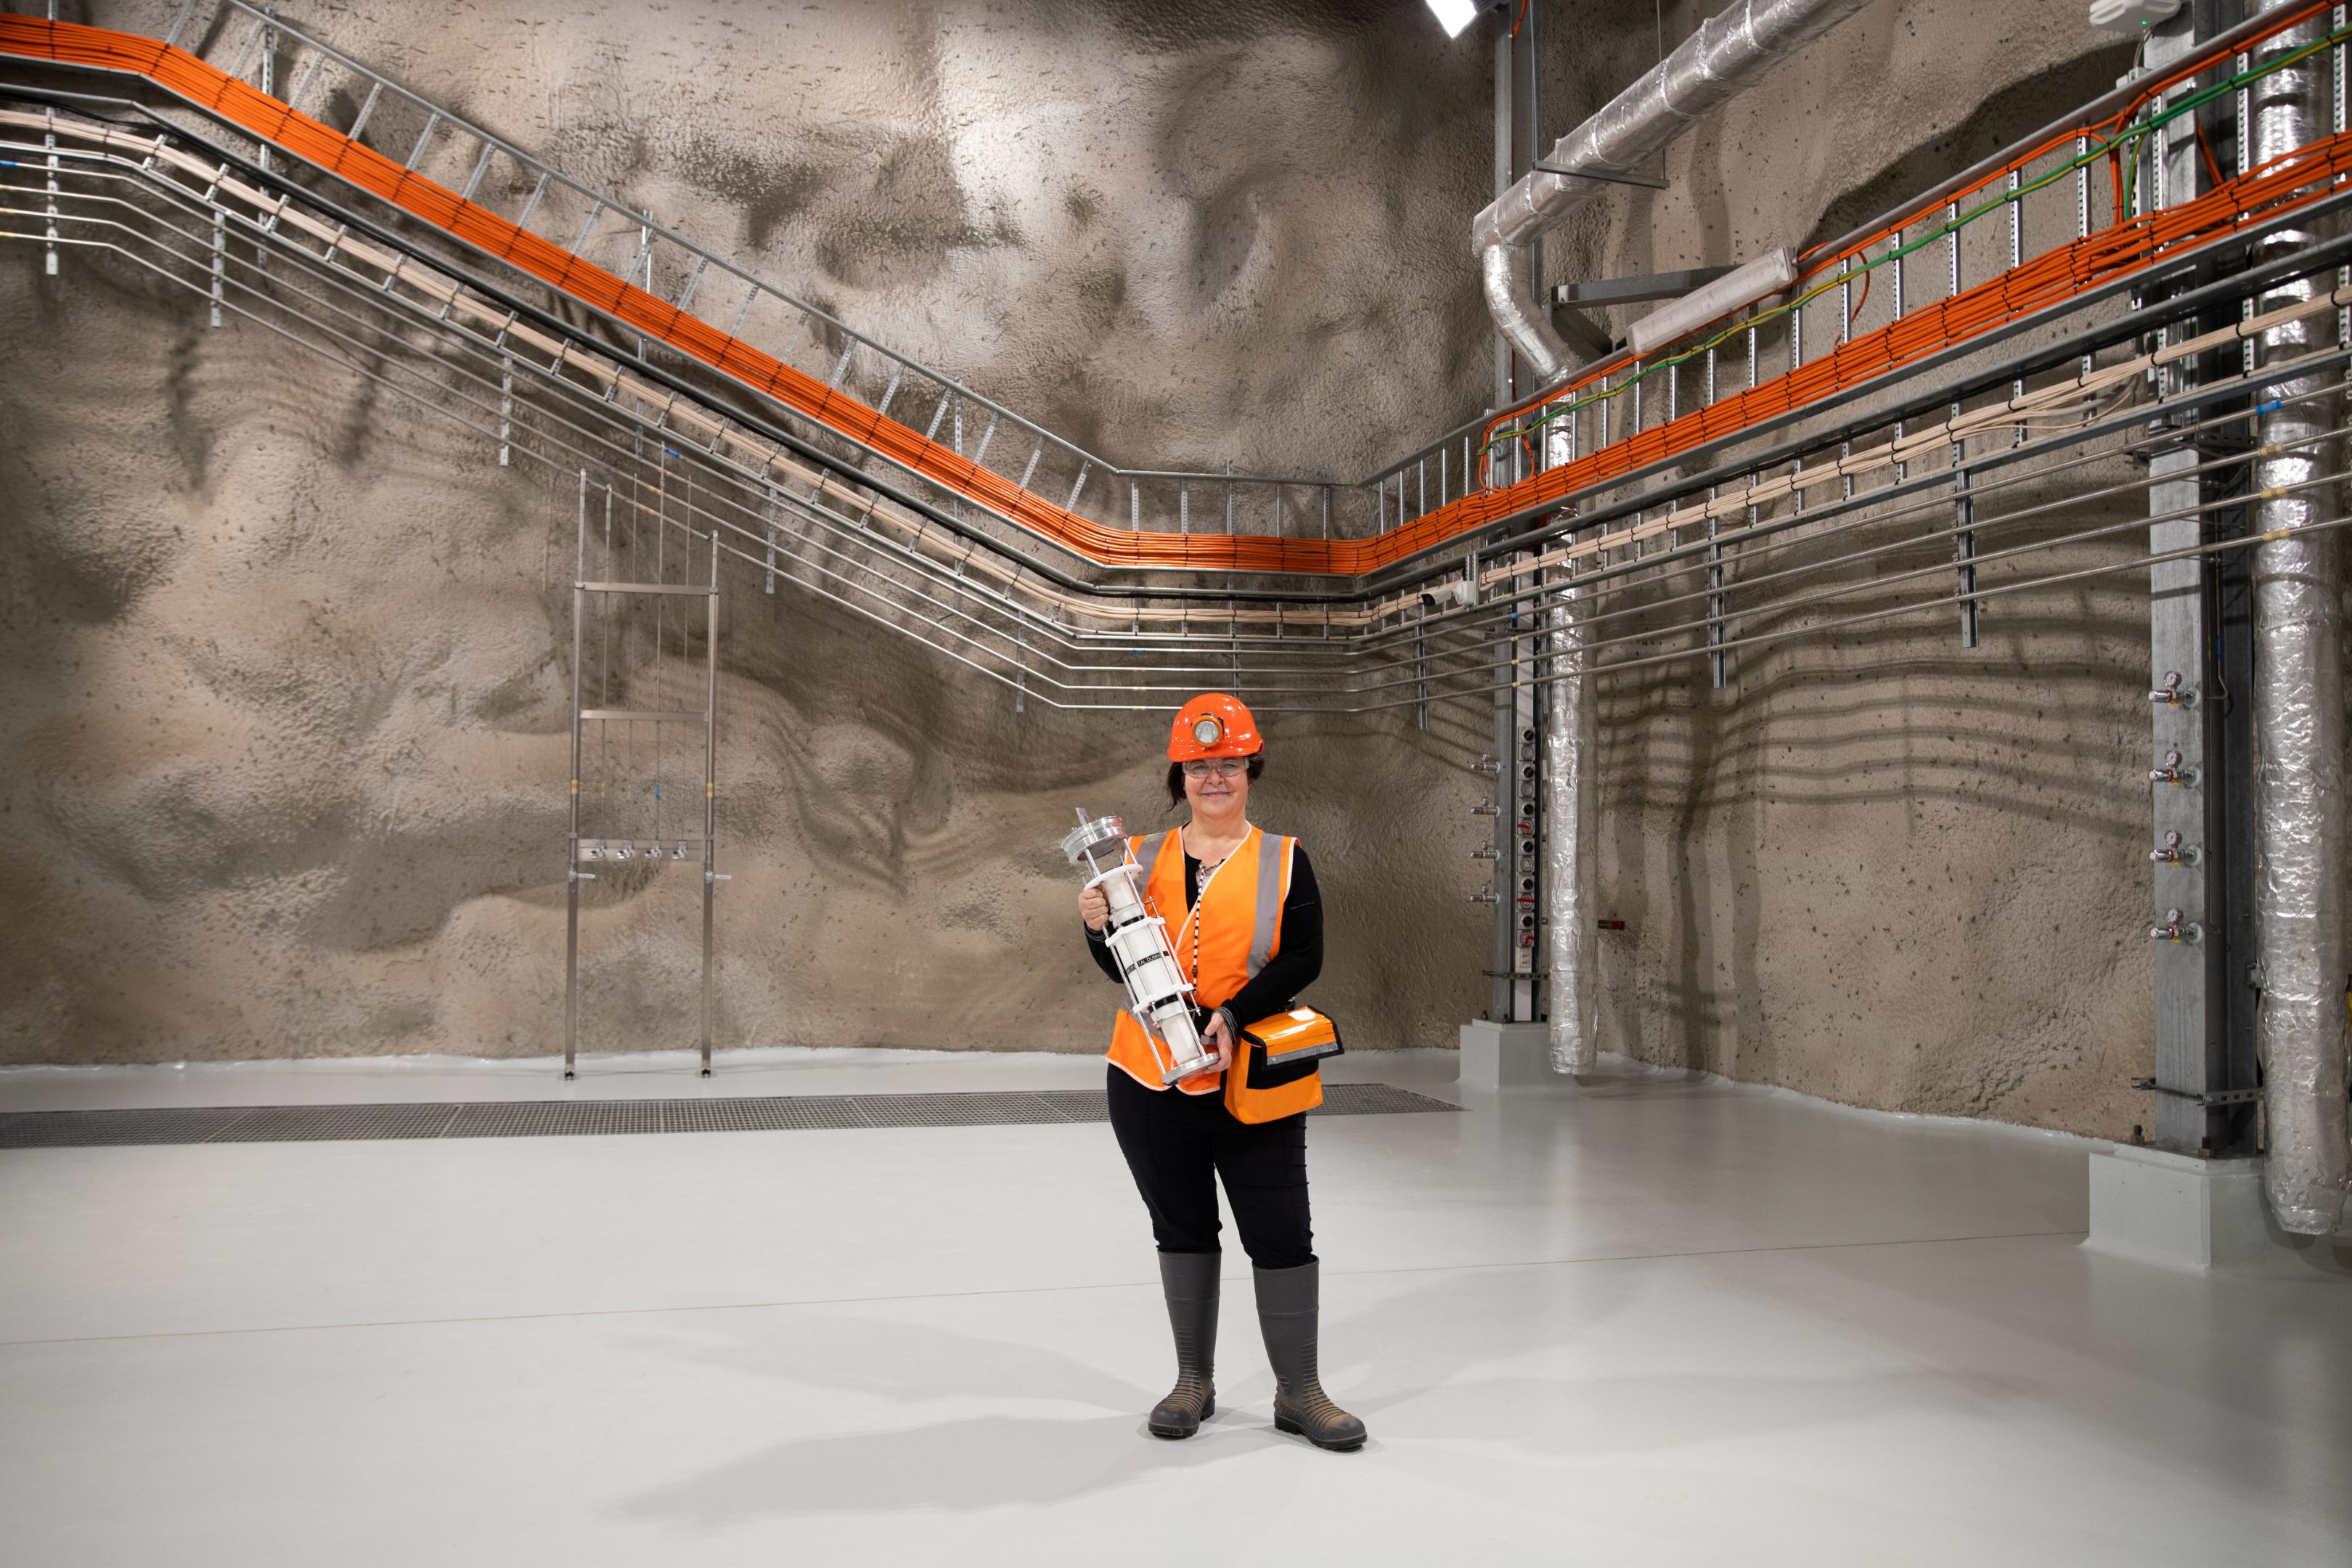 Lead researcher on the project, Professor Elisabetta Barberio from the University of Melbourne, unveils the Stawell Underground Physics Laboratory